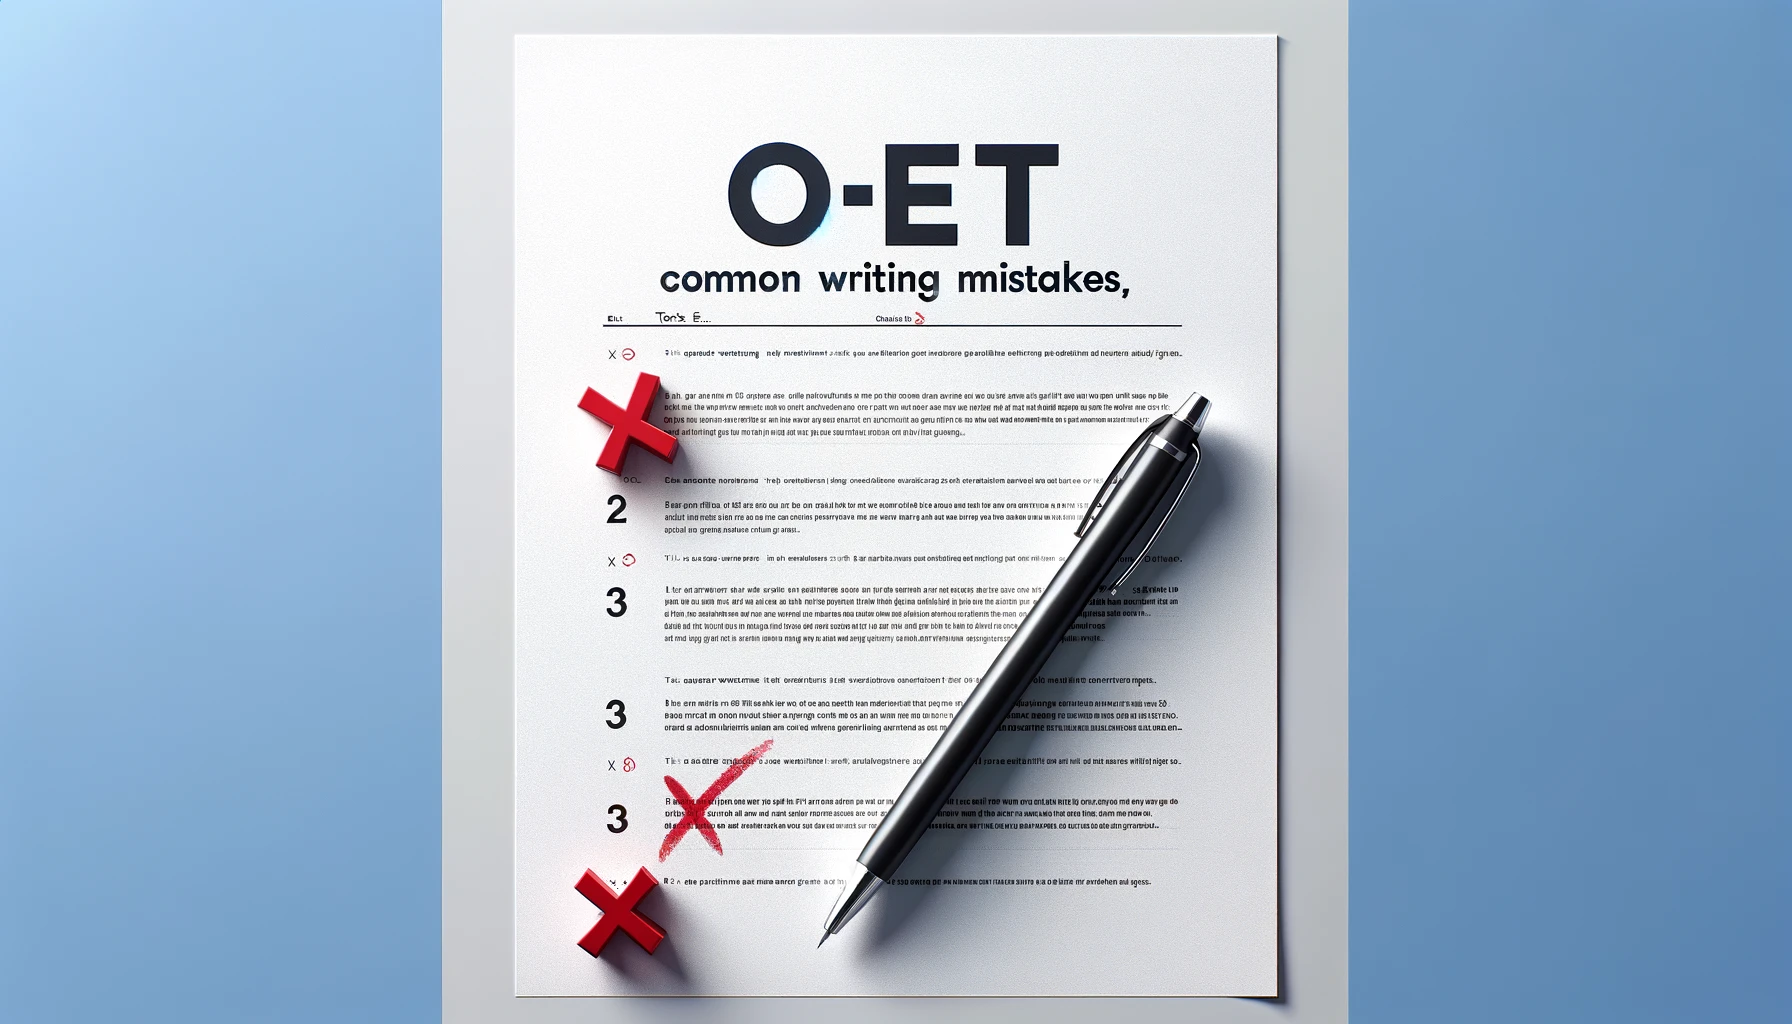 Commonly found mistakes in OET